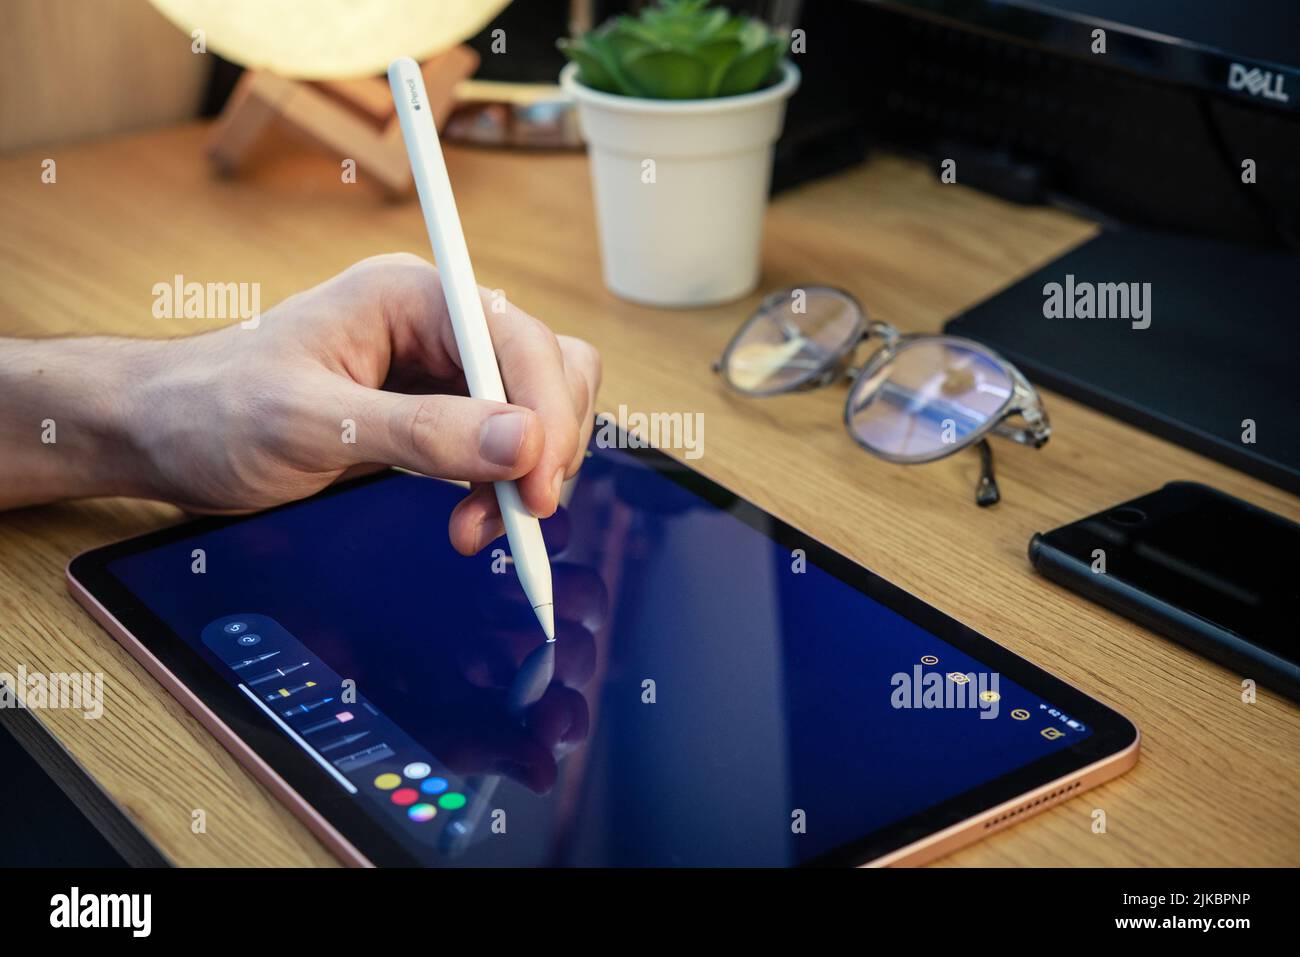 KIEV, UKRAINE - DECEMBER 21, 2021:Man with Apple Pencil using iPad Pro for drawing. iPad Pro was created and developed by the Apple inc. Stock Photo